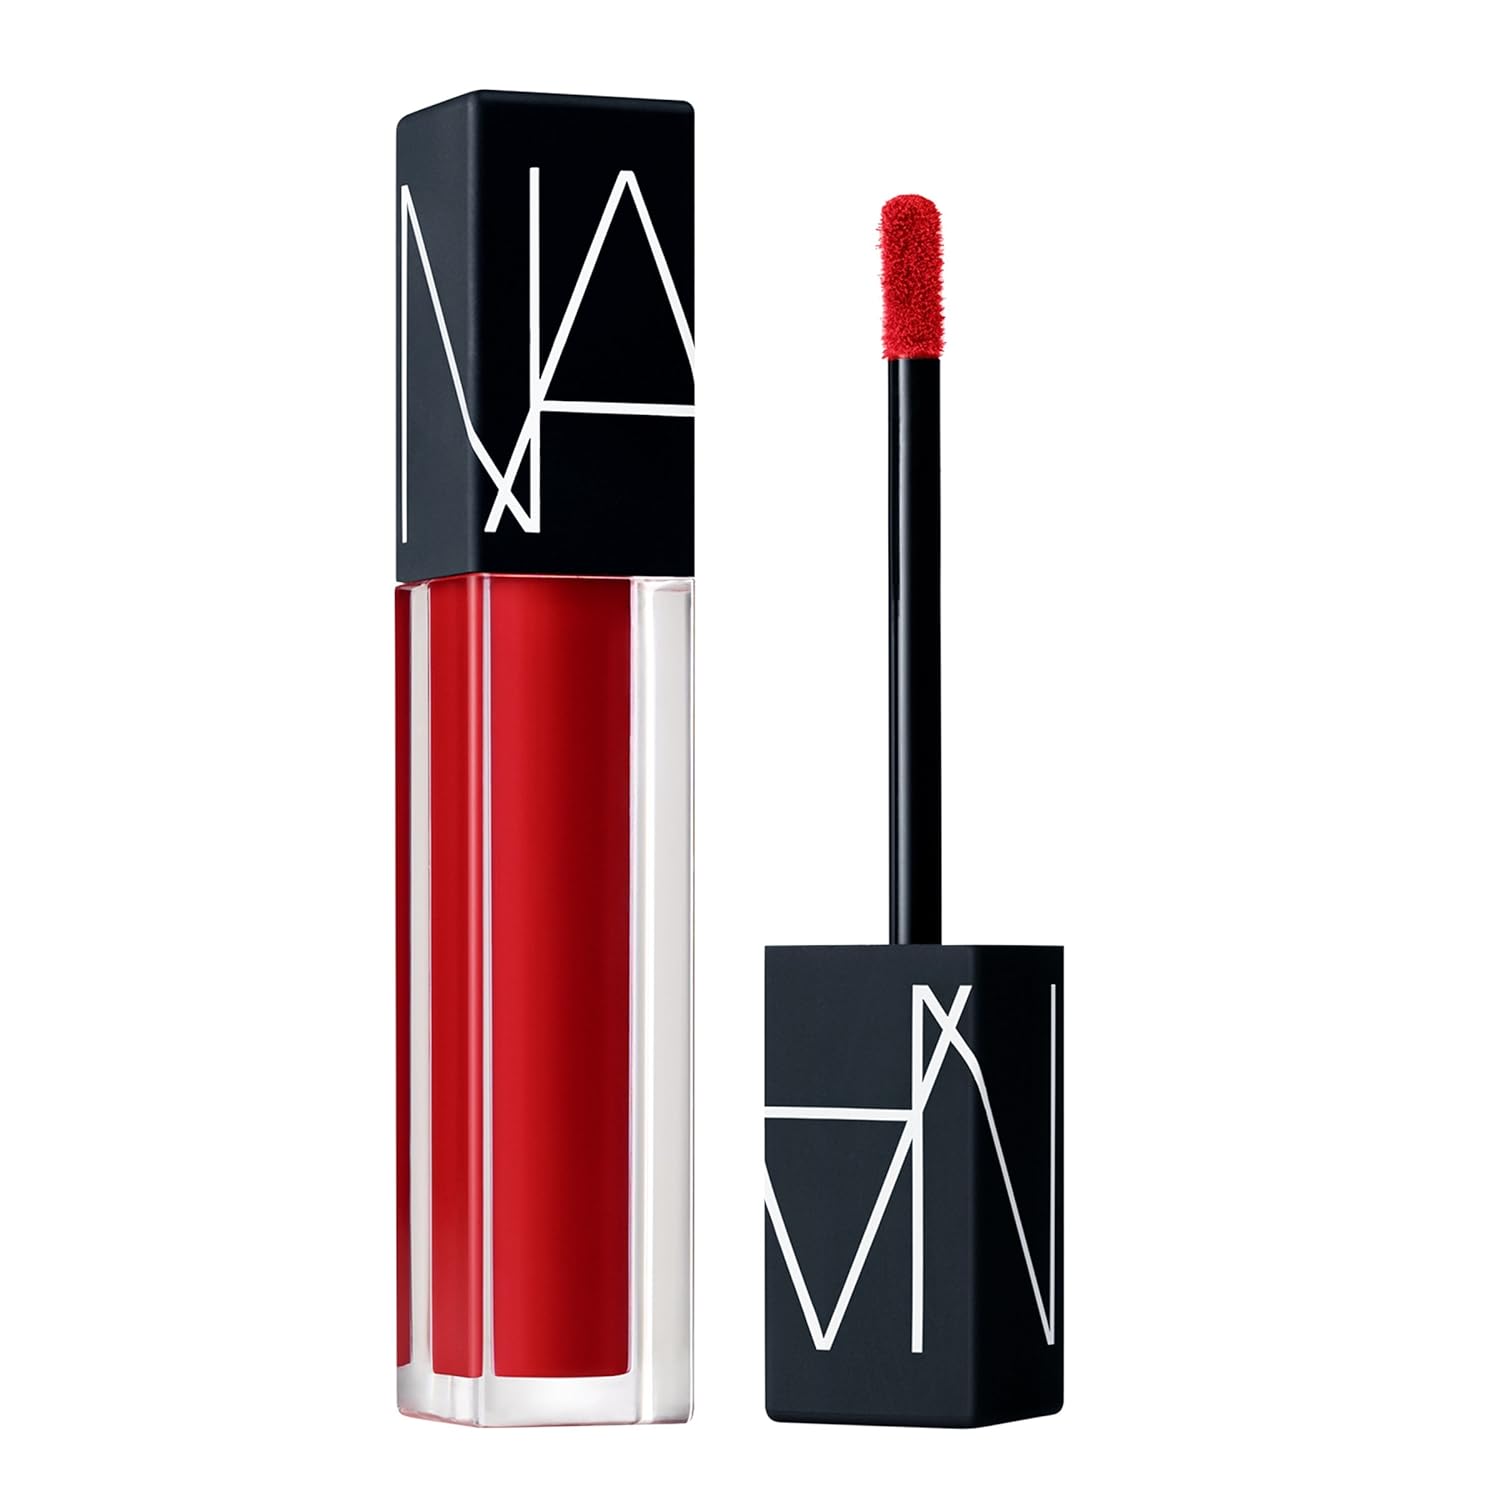 NARS Sexy Red Lip Gloss in Norma